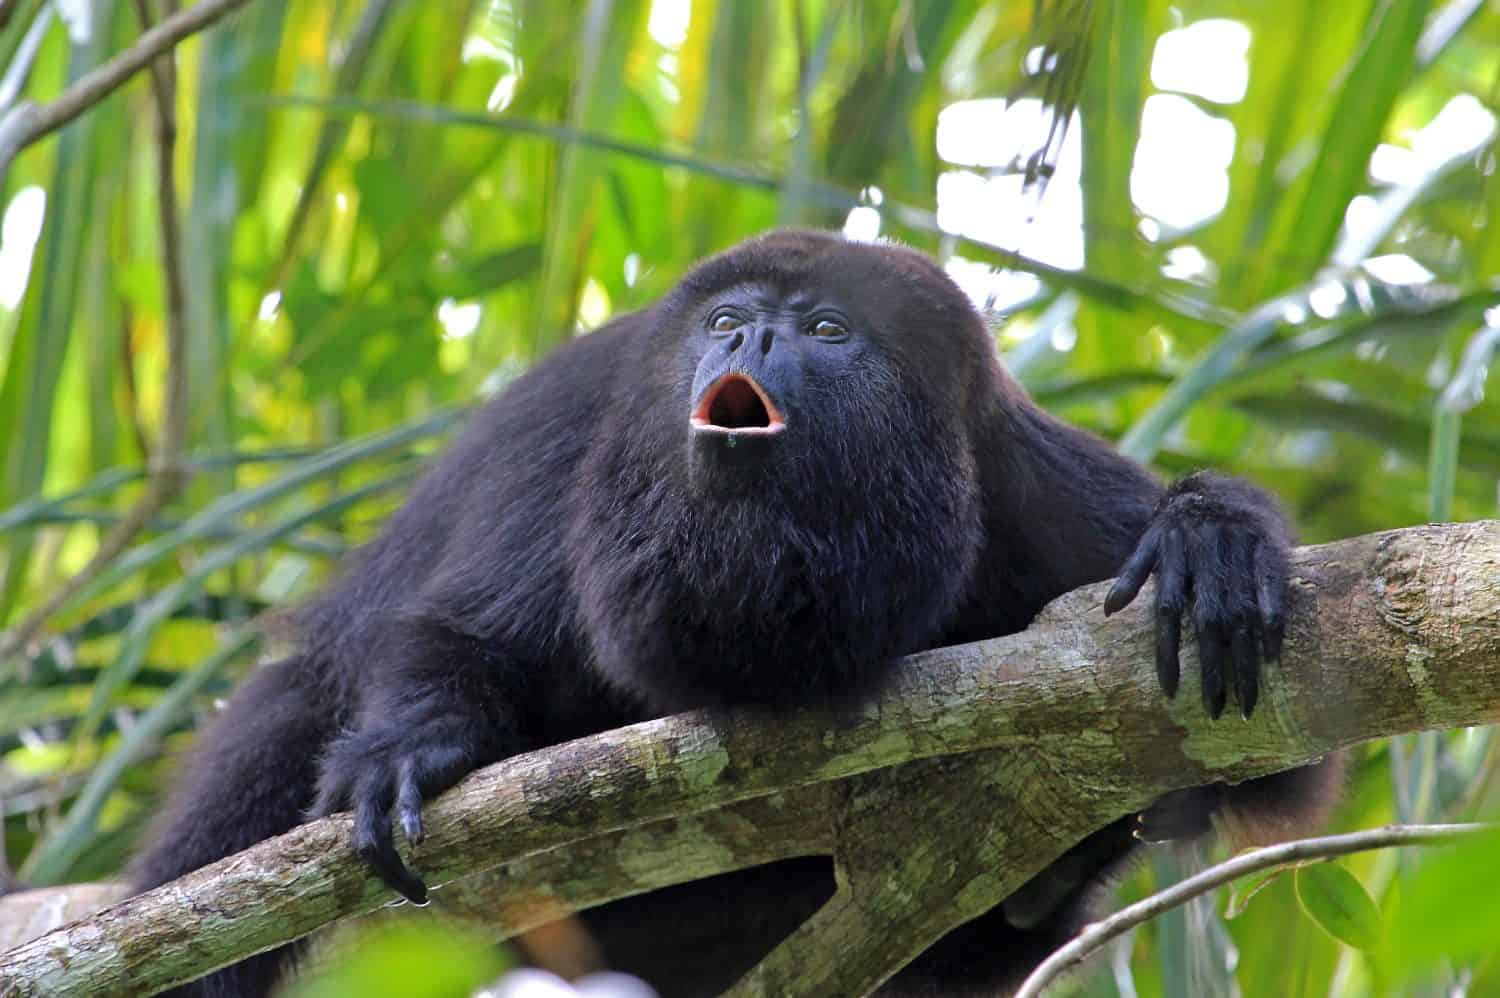 Black or Guatemalan Howler Monkey, alouatta pigra or caraya, sitting on a tree in Belize jungle and howling like crazy. They are also found in Mexico and Guatemala.